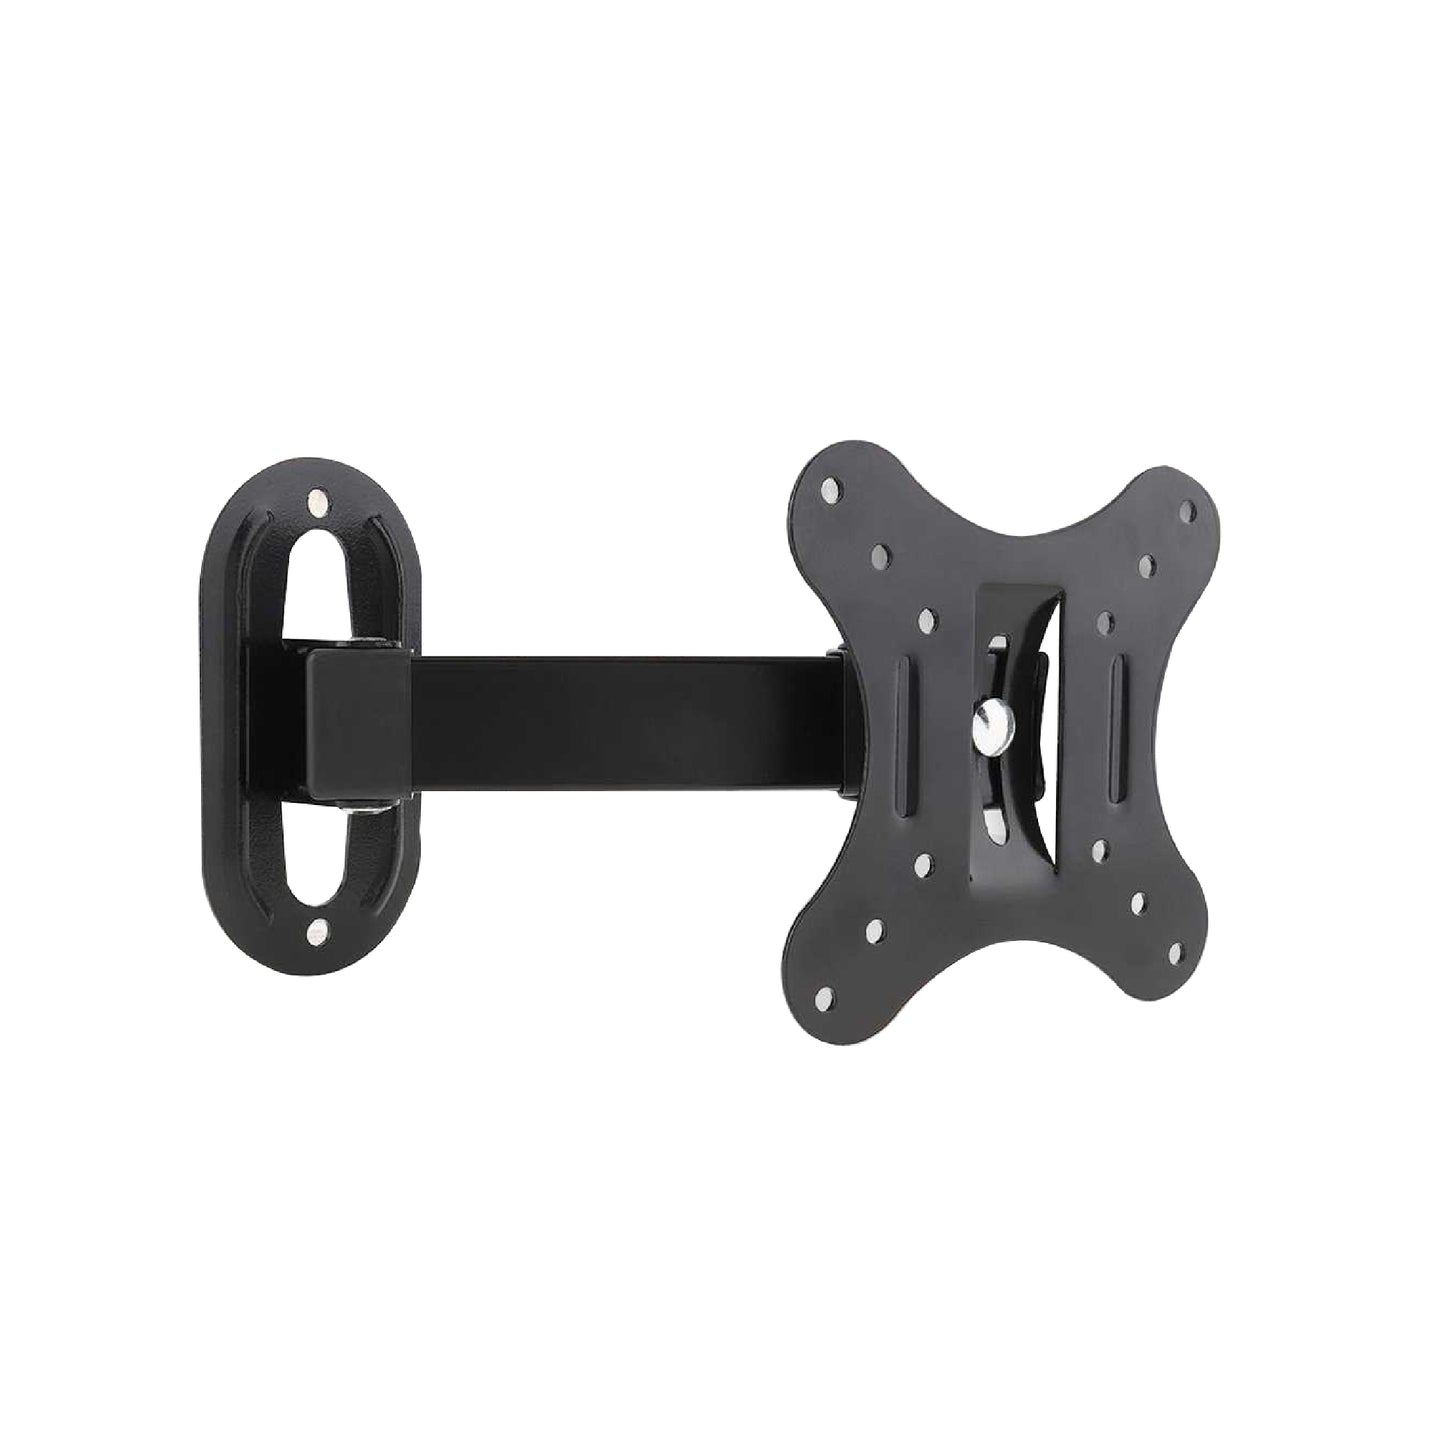 Mcoco Universal LED Tv Bracket Suitable For 14 to 24 Inches Black Color - LCDCP100